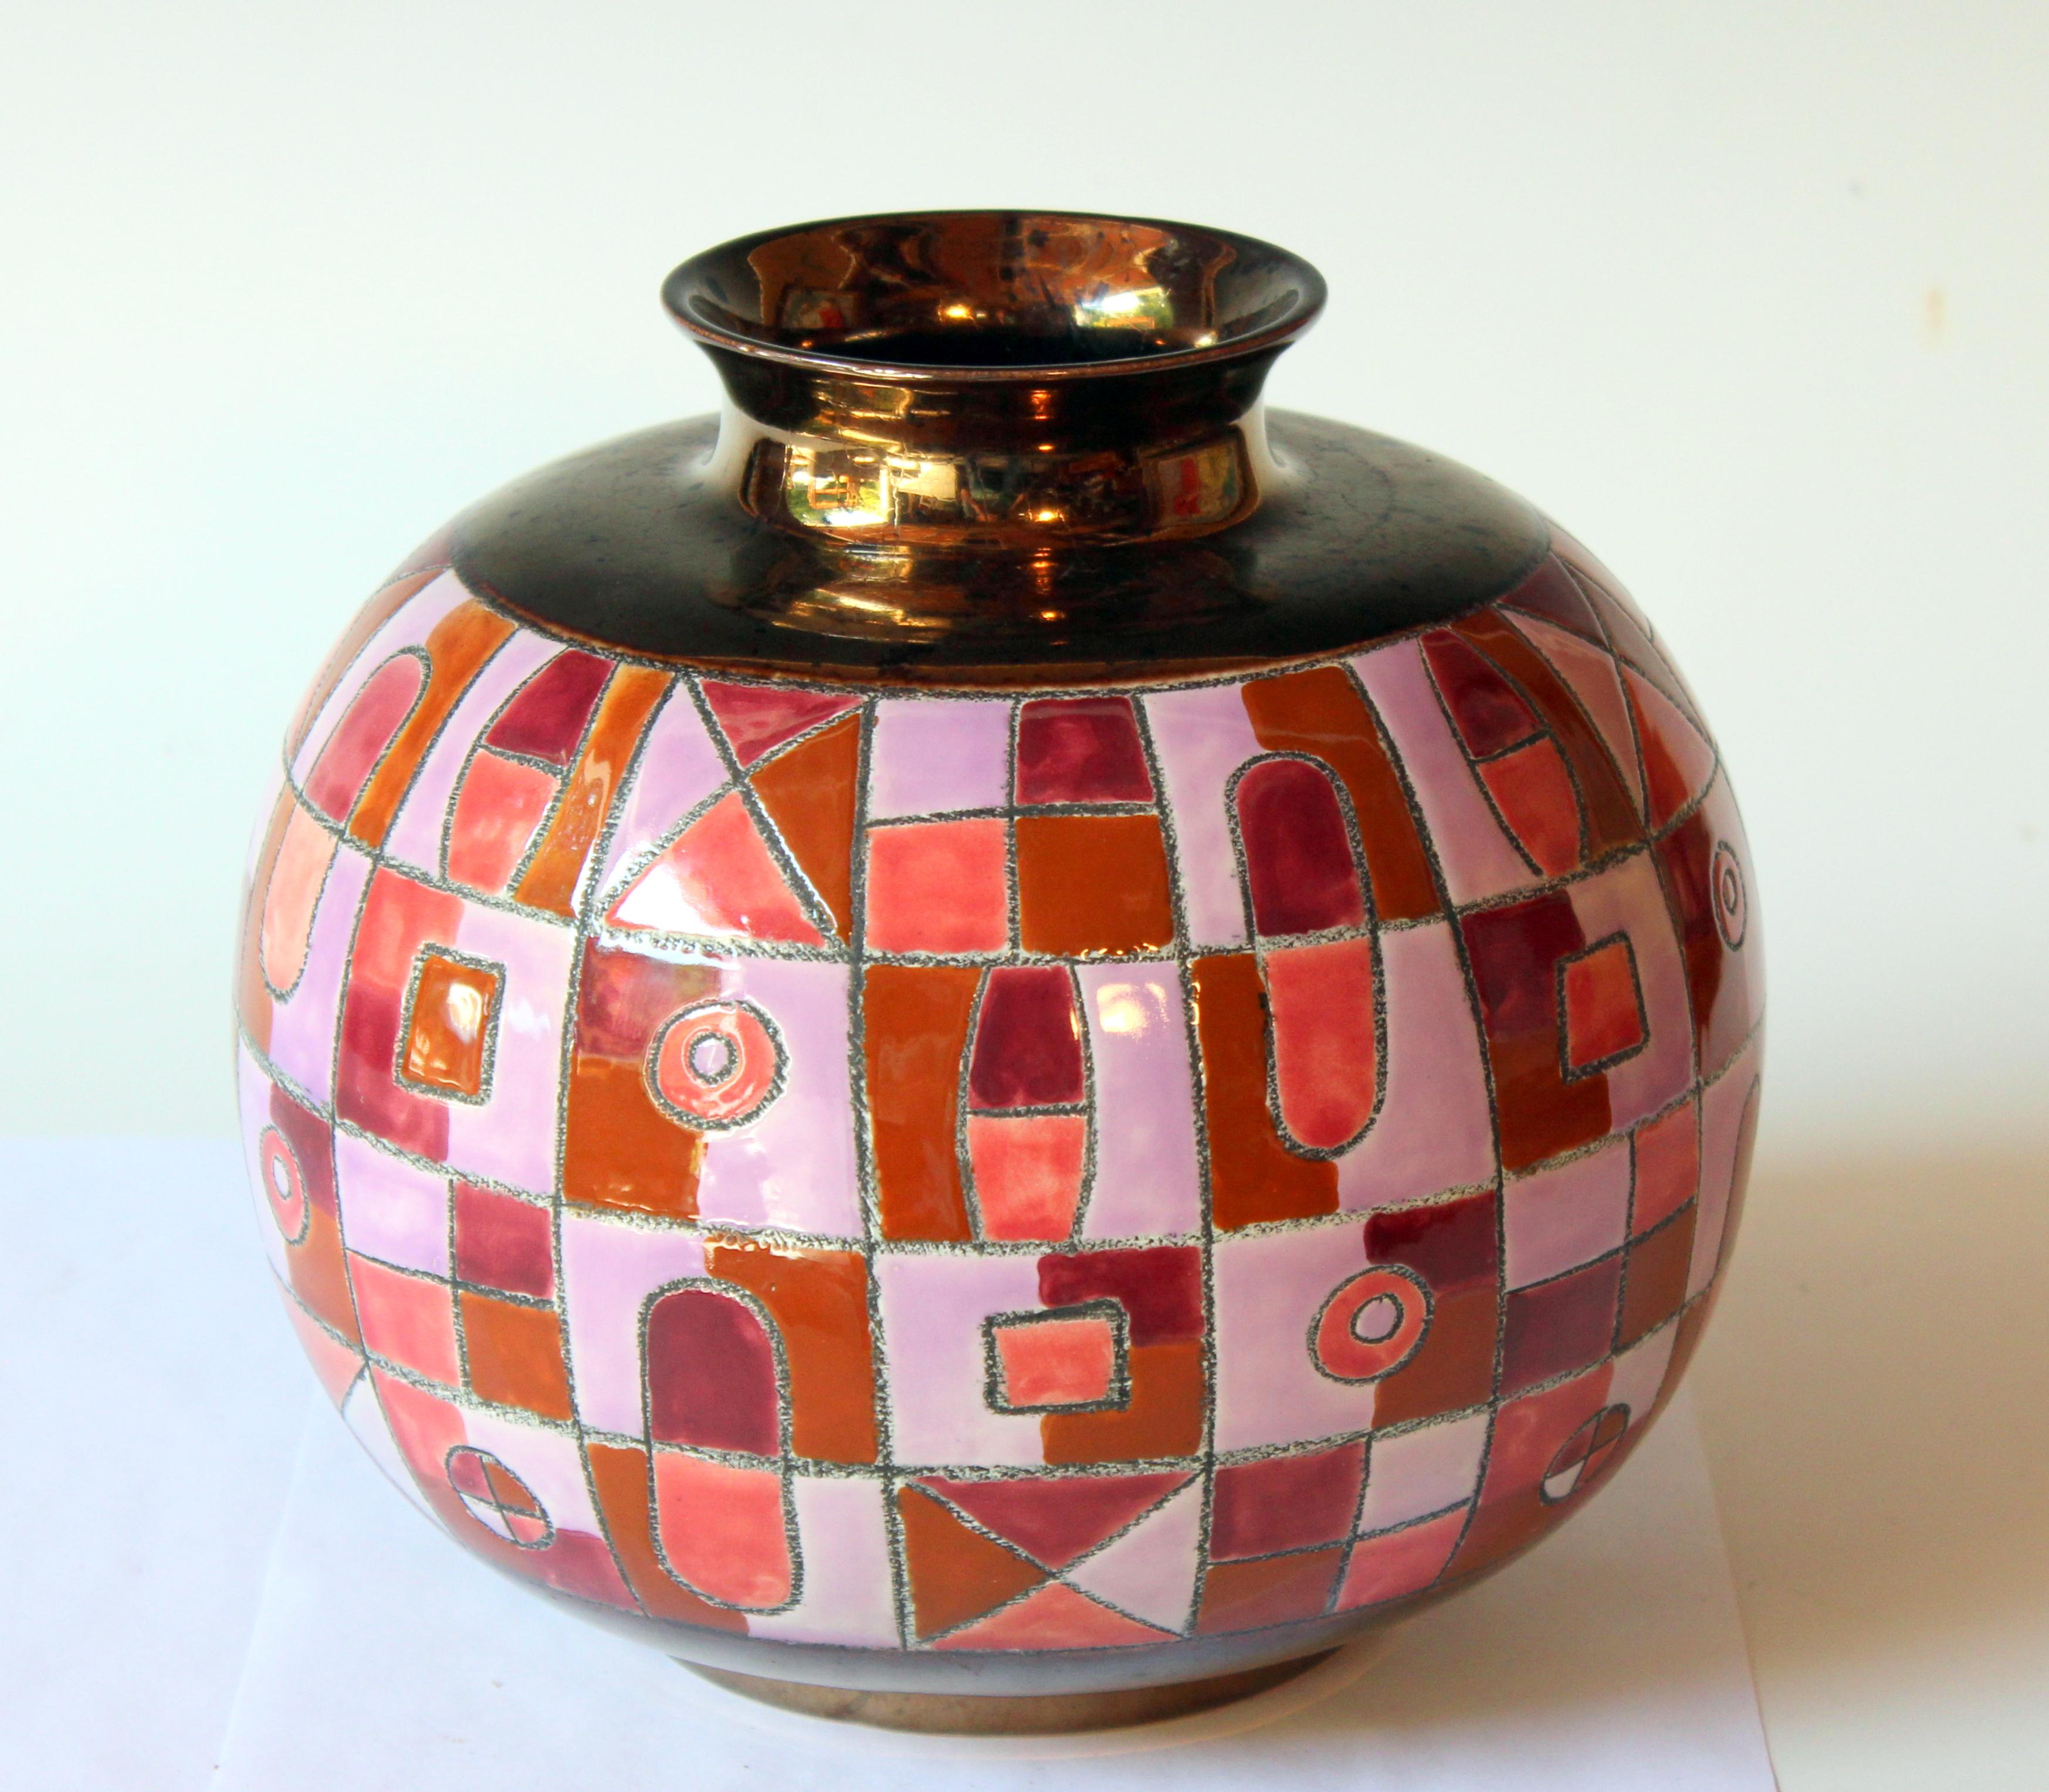 Vintage ceramic vase with lively enameled geometric pattern between copper luster base and top by renowned Ecuadoran artist Eduardo Vega. Signed on lower panel, circa 1970s. Measures: 8